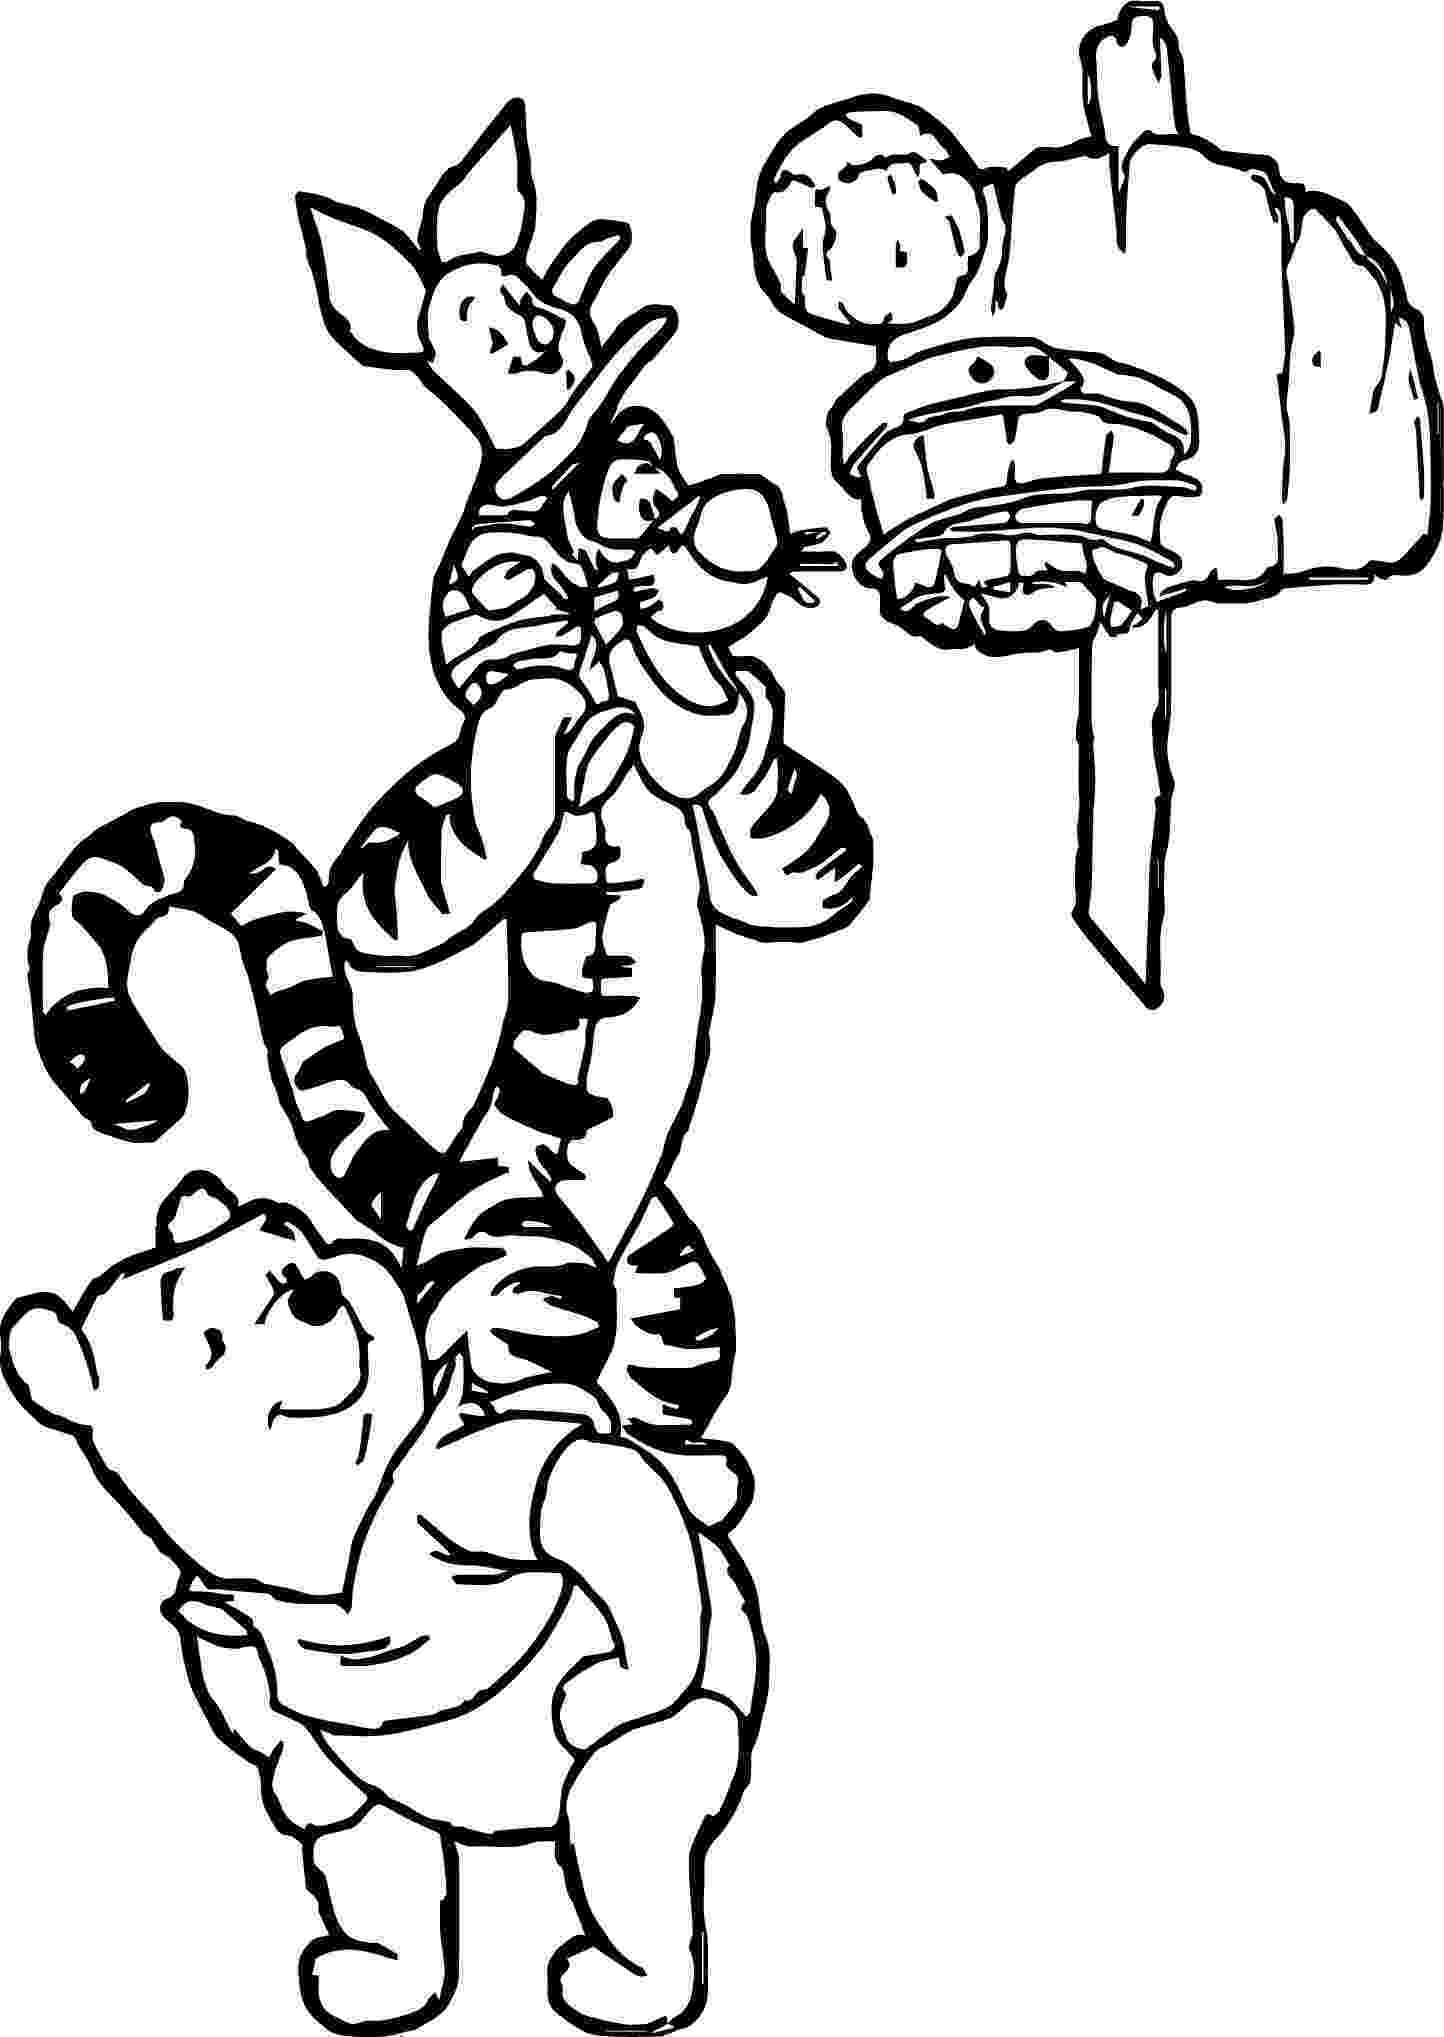 sports colouring disney basketball images sports at disney galore playing colouring sports 